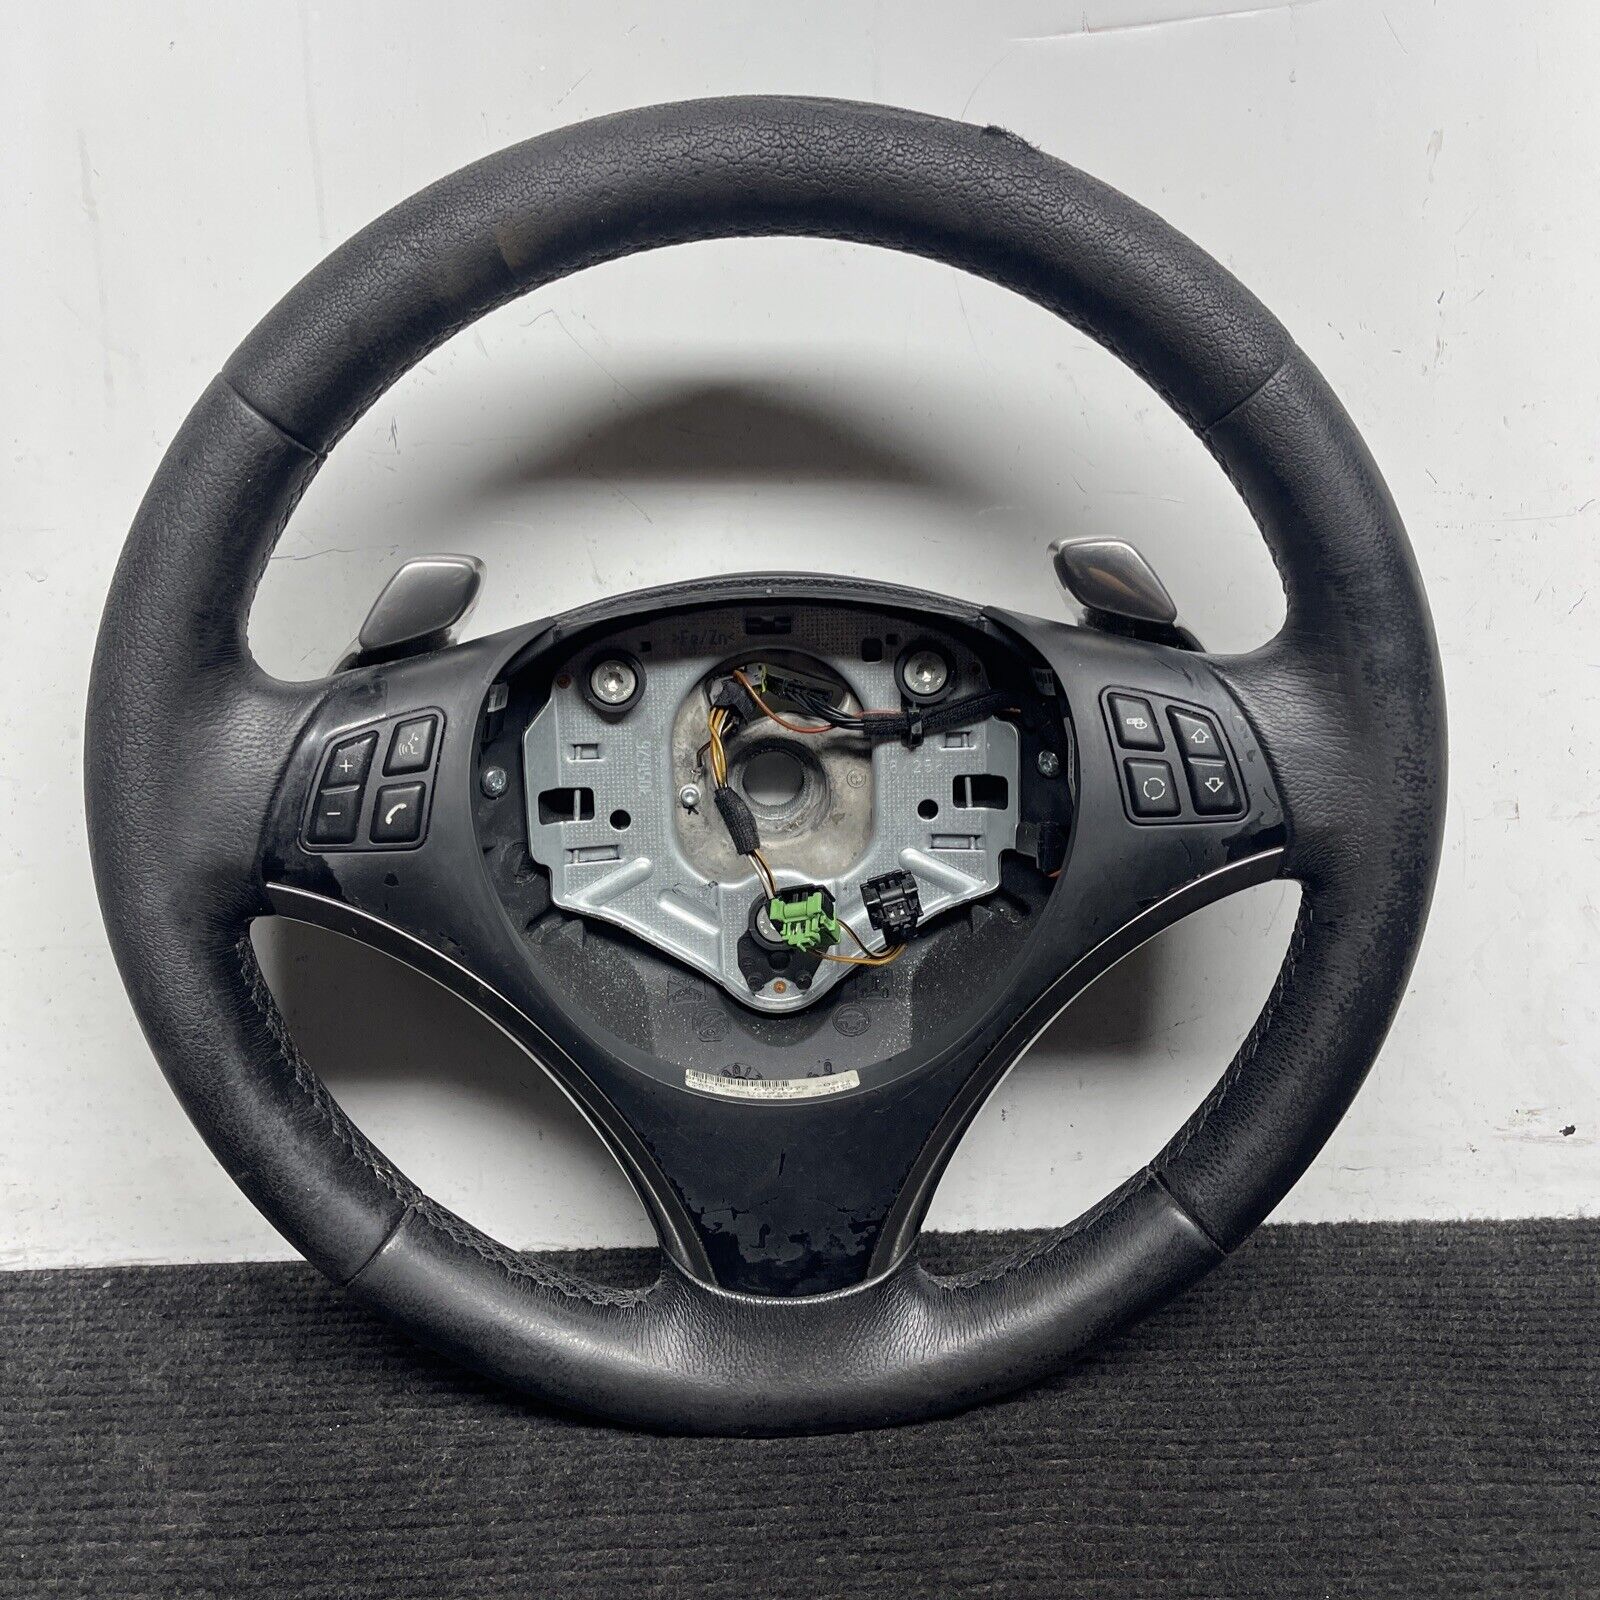 ☑️ 06-13 BMW E90 E92 E93 128I 135I 328I 335I SPORT STEERING WHEEL W PADDLES NOTE